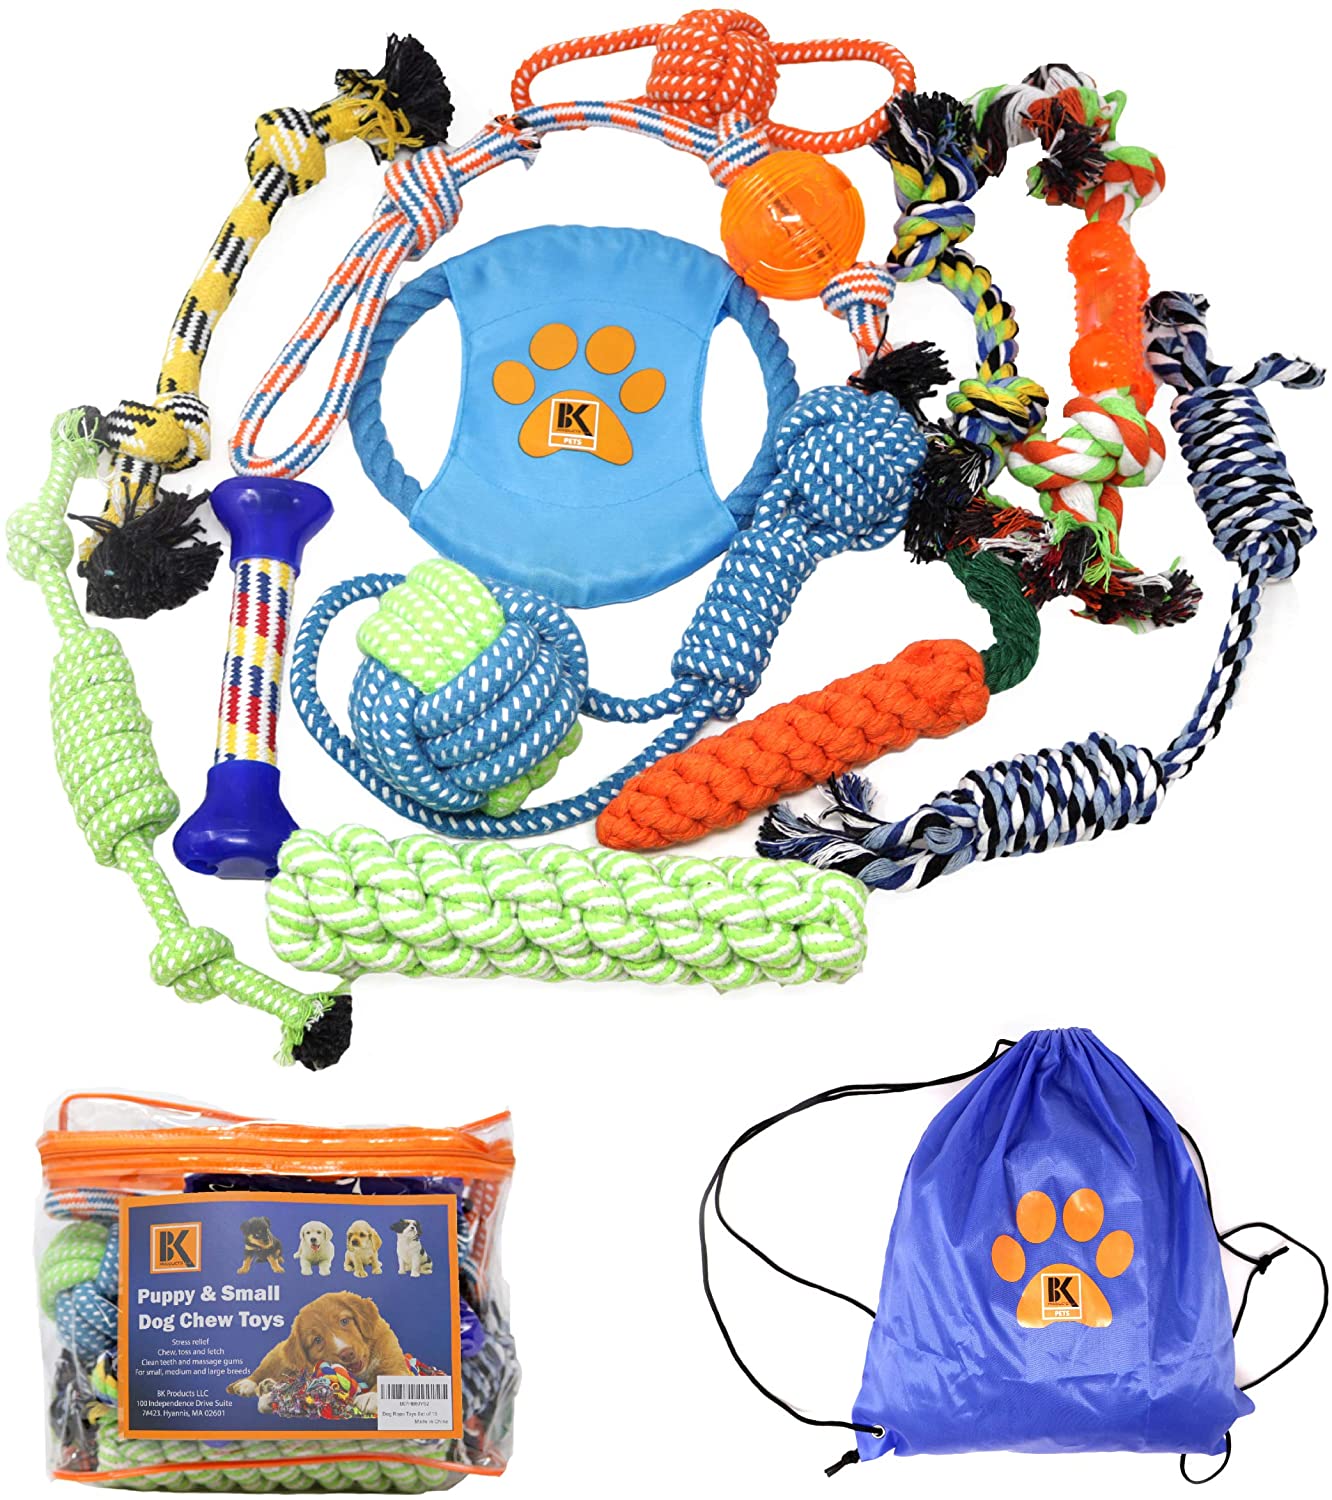 Dog Toys - Set of 13 Dog Chew Toys for Puppy and Small Dogs  BK - image 5 of 8